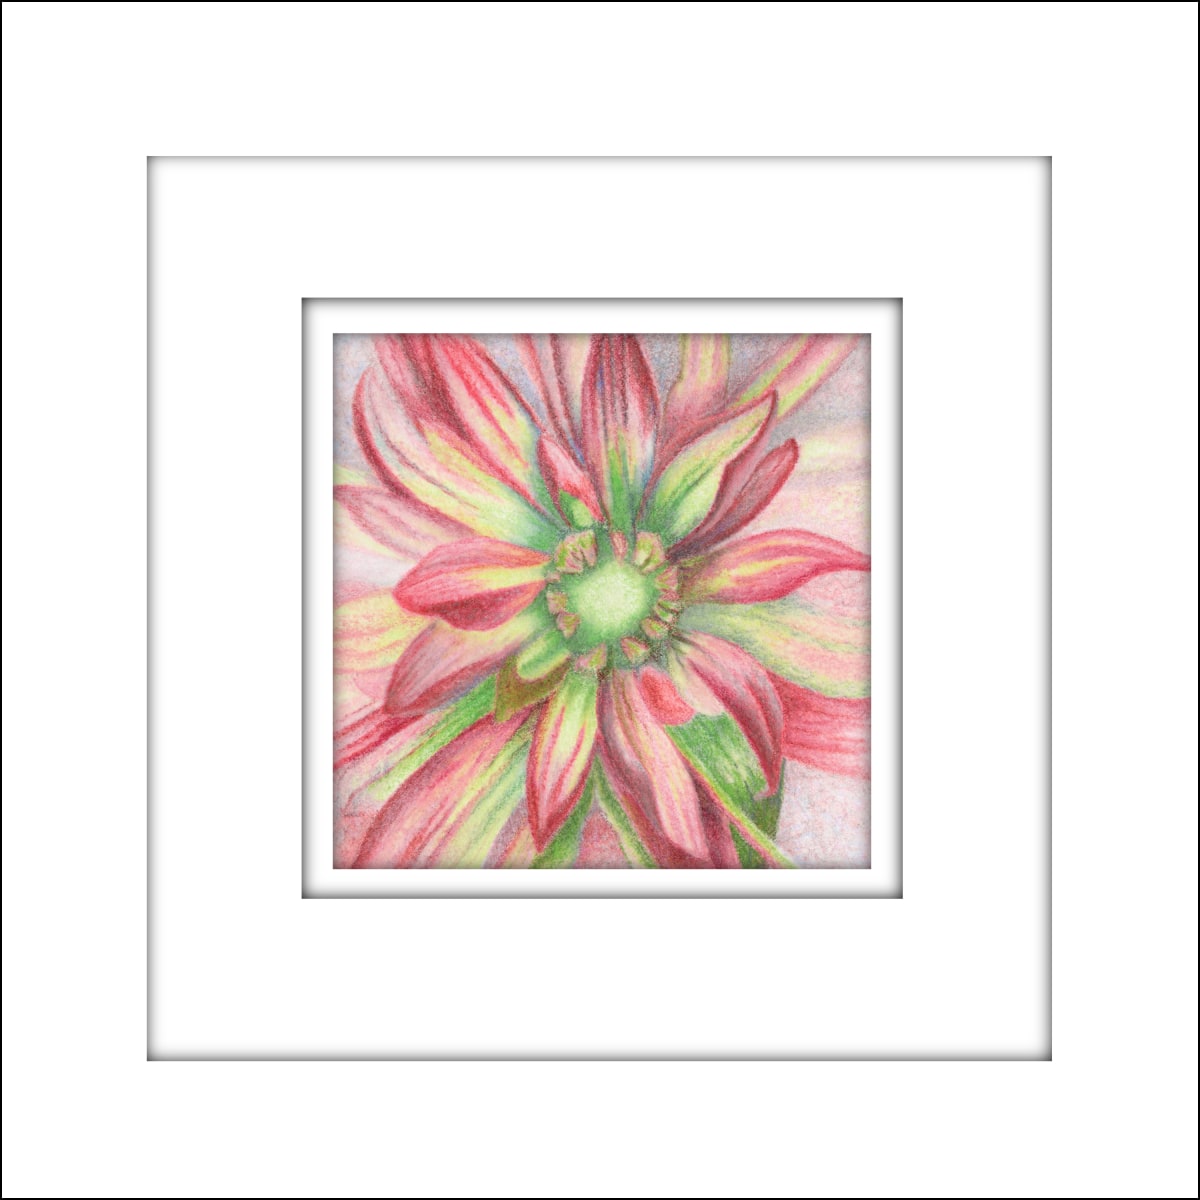 Bahama Mama Dahlia by Mary Ahern  Image: Watercolor and colored pencil drawing. Double matted and Framed in white